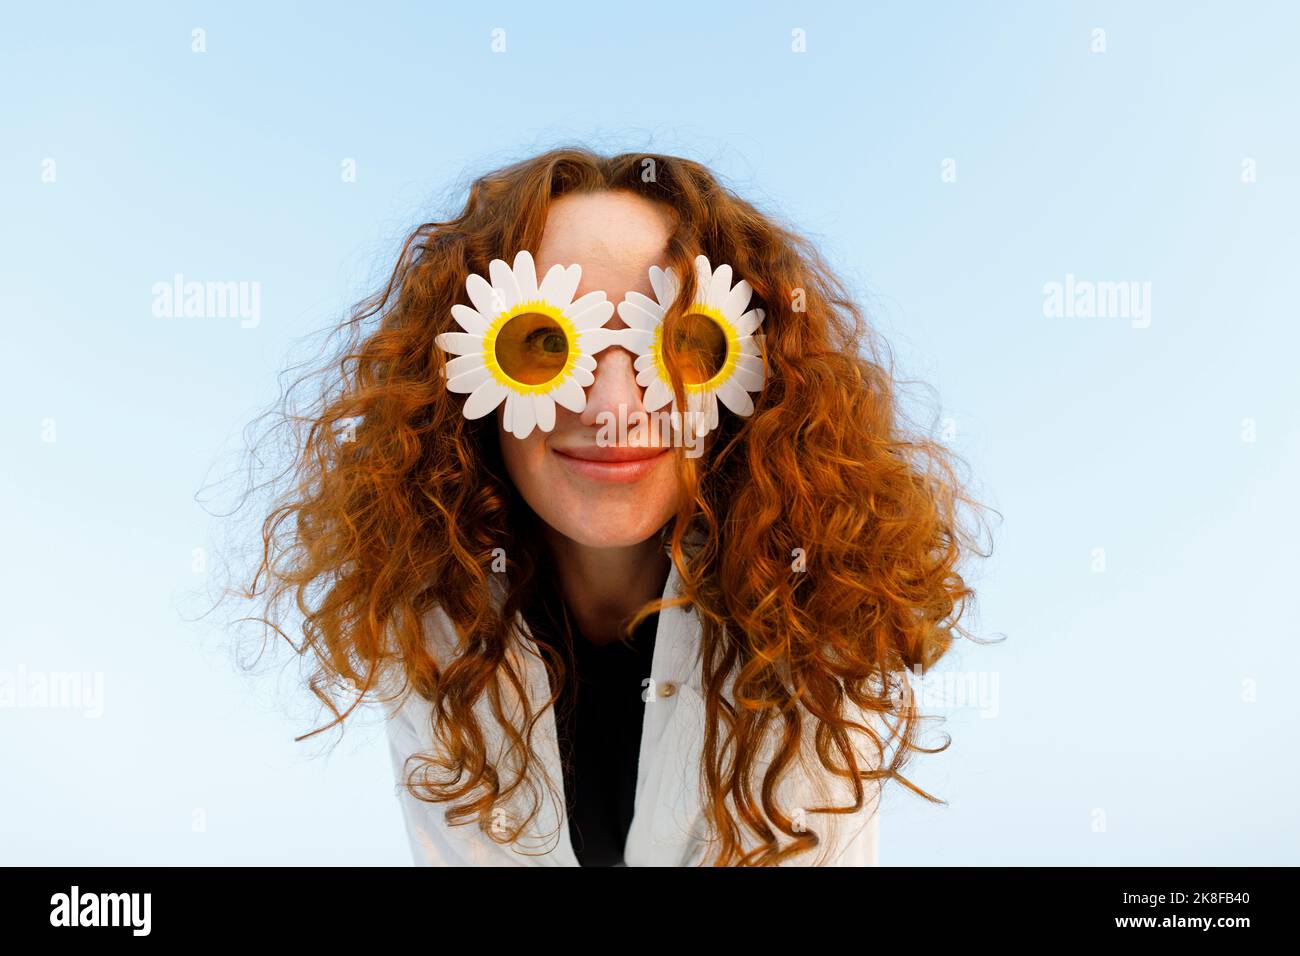 Smiling woman with curly hair wearing sunflower sunglasses Stock Photo